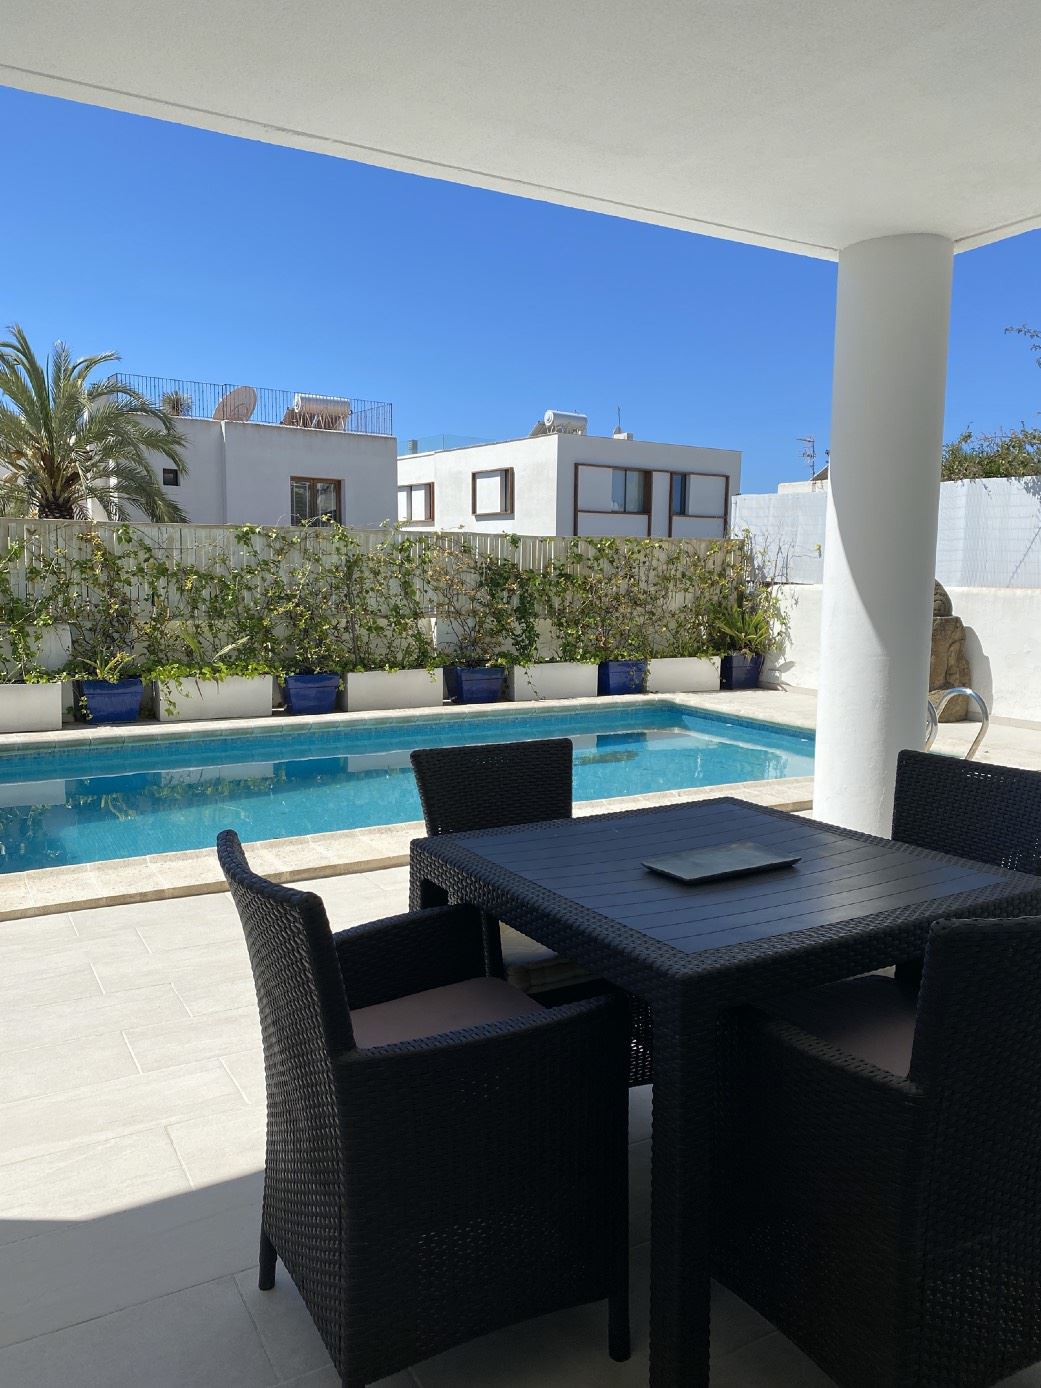 Beautiful and charming townhouse in the heart of Ibiza, Santa Gertrudis